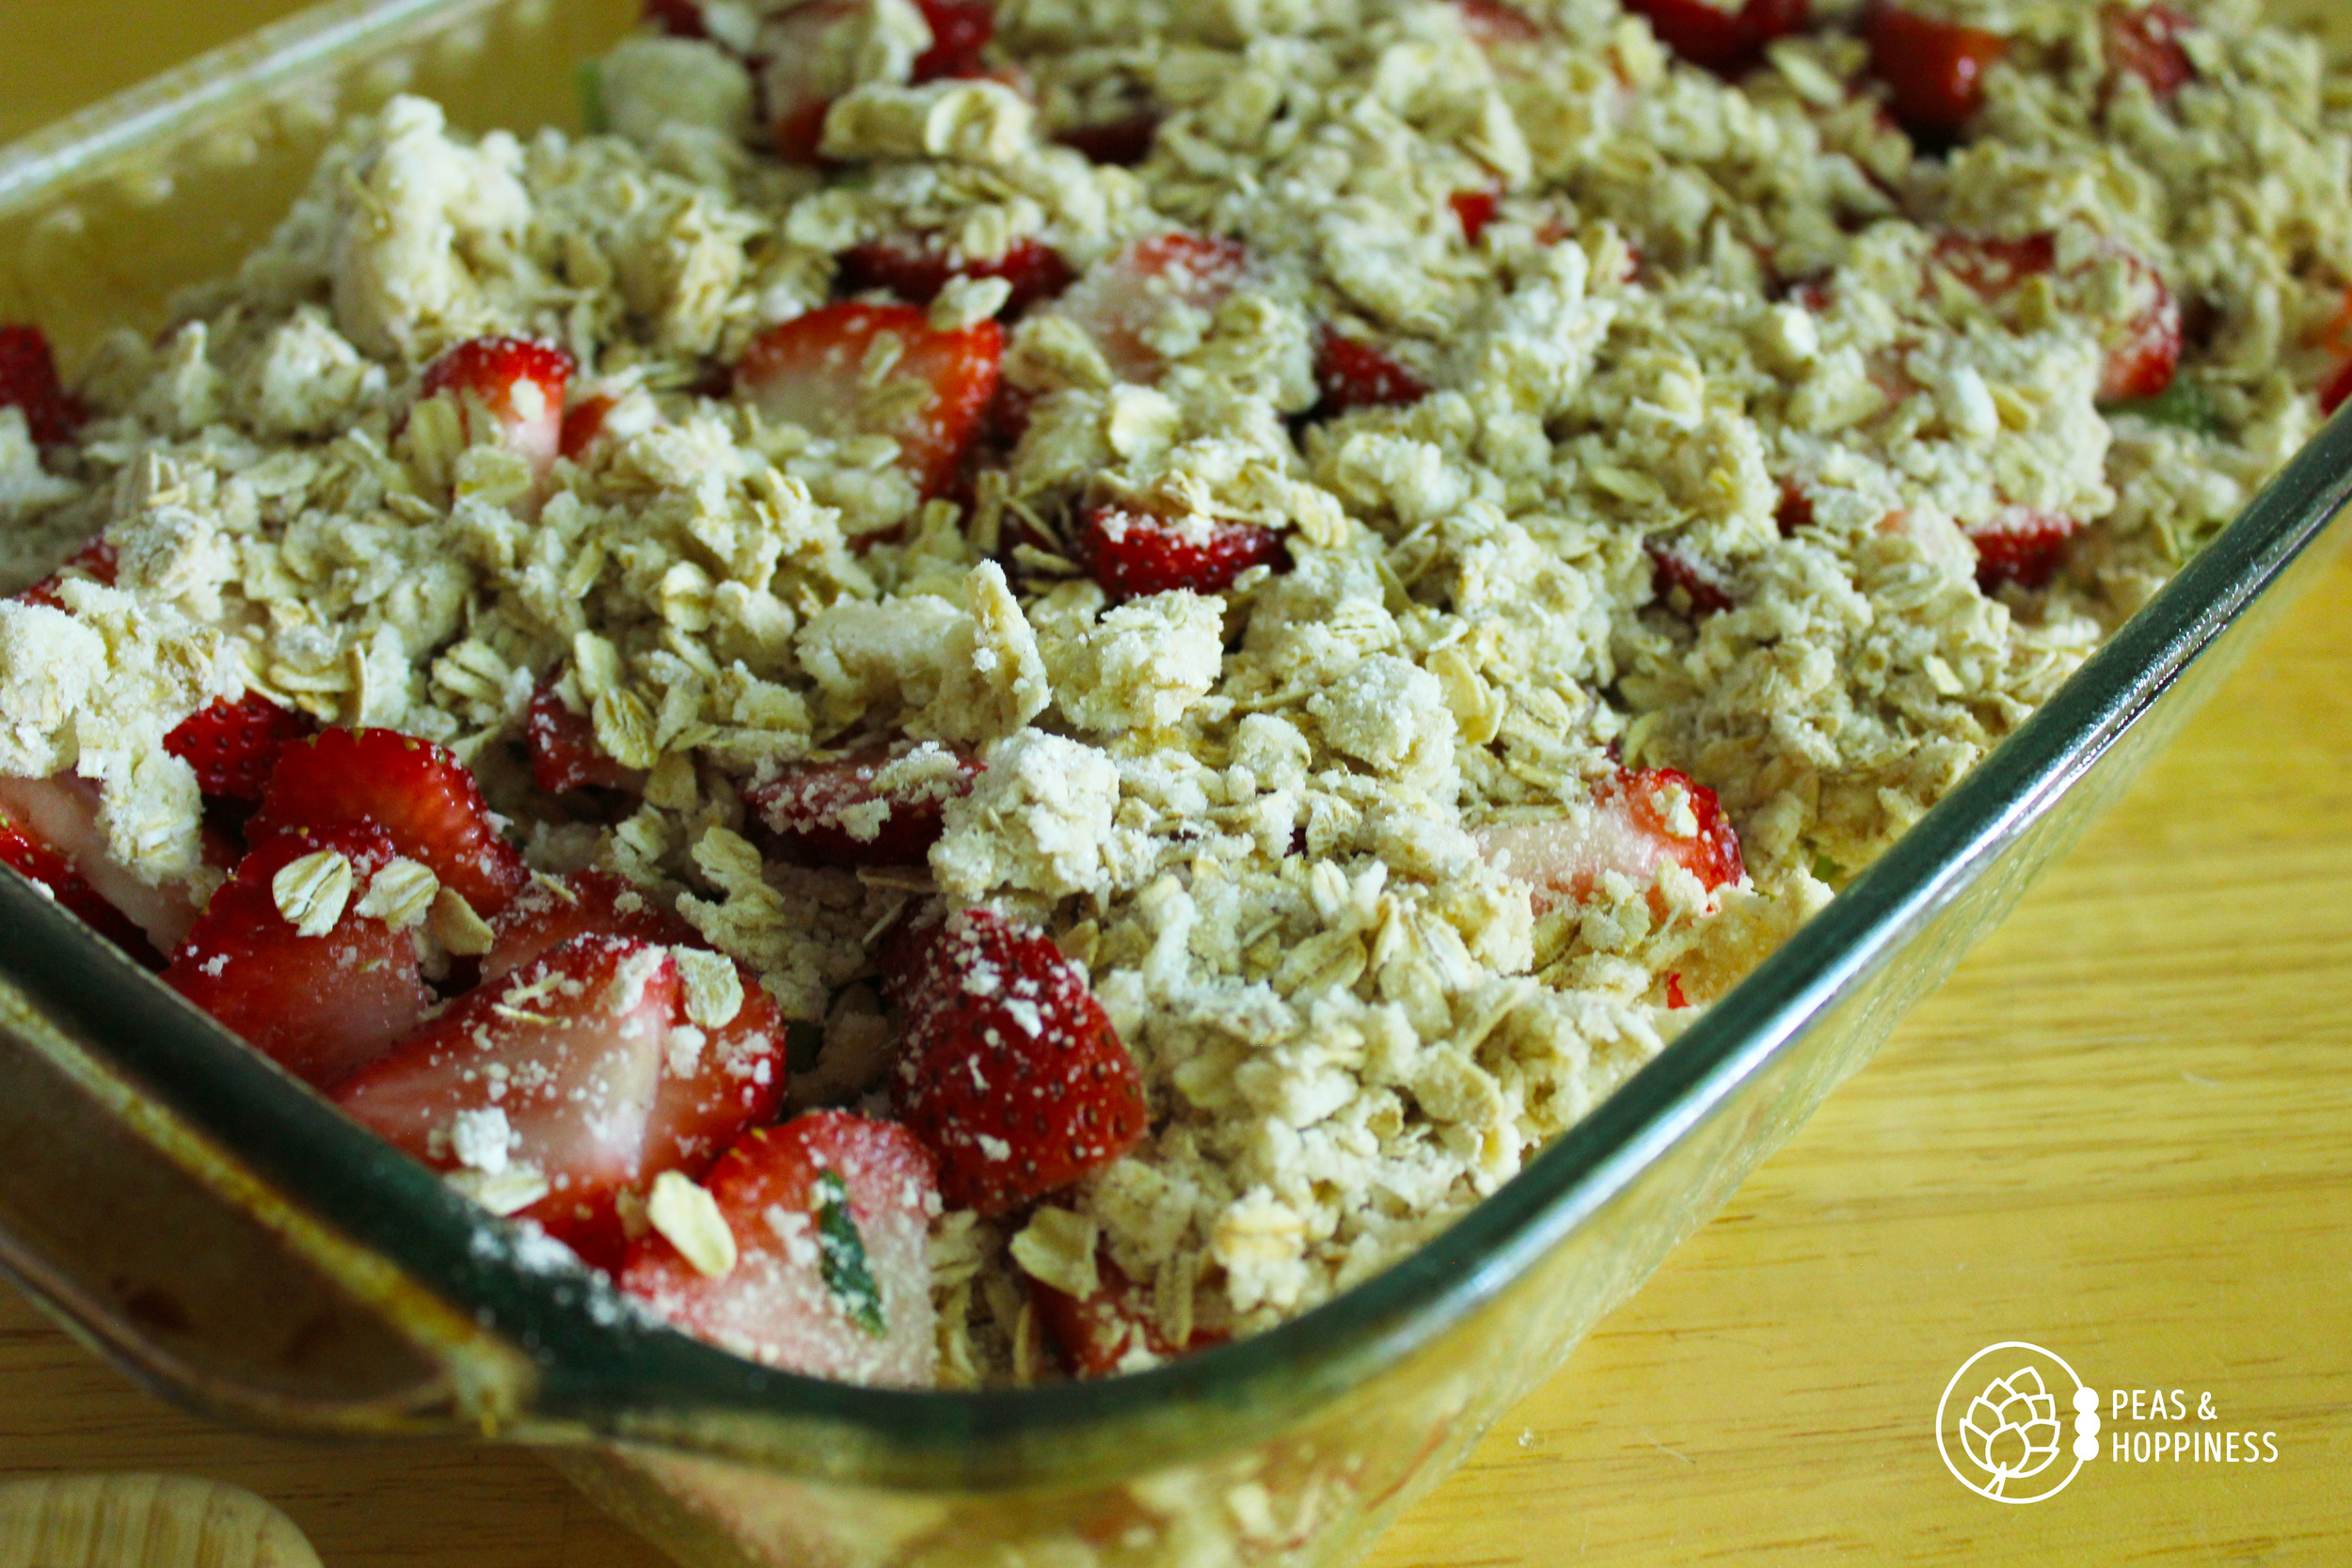 Strawberry Rhubarb Crisp from Peas and Hoppiness - www. peasandhoppiness.com